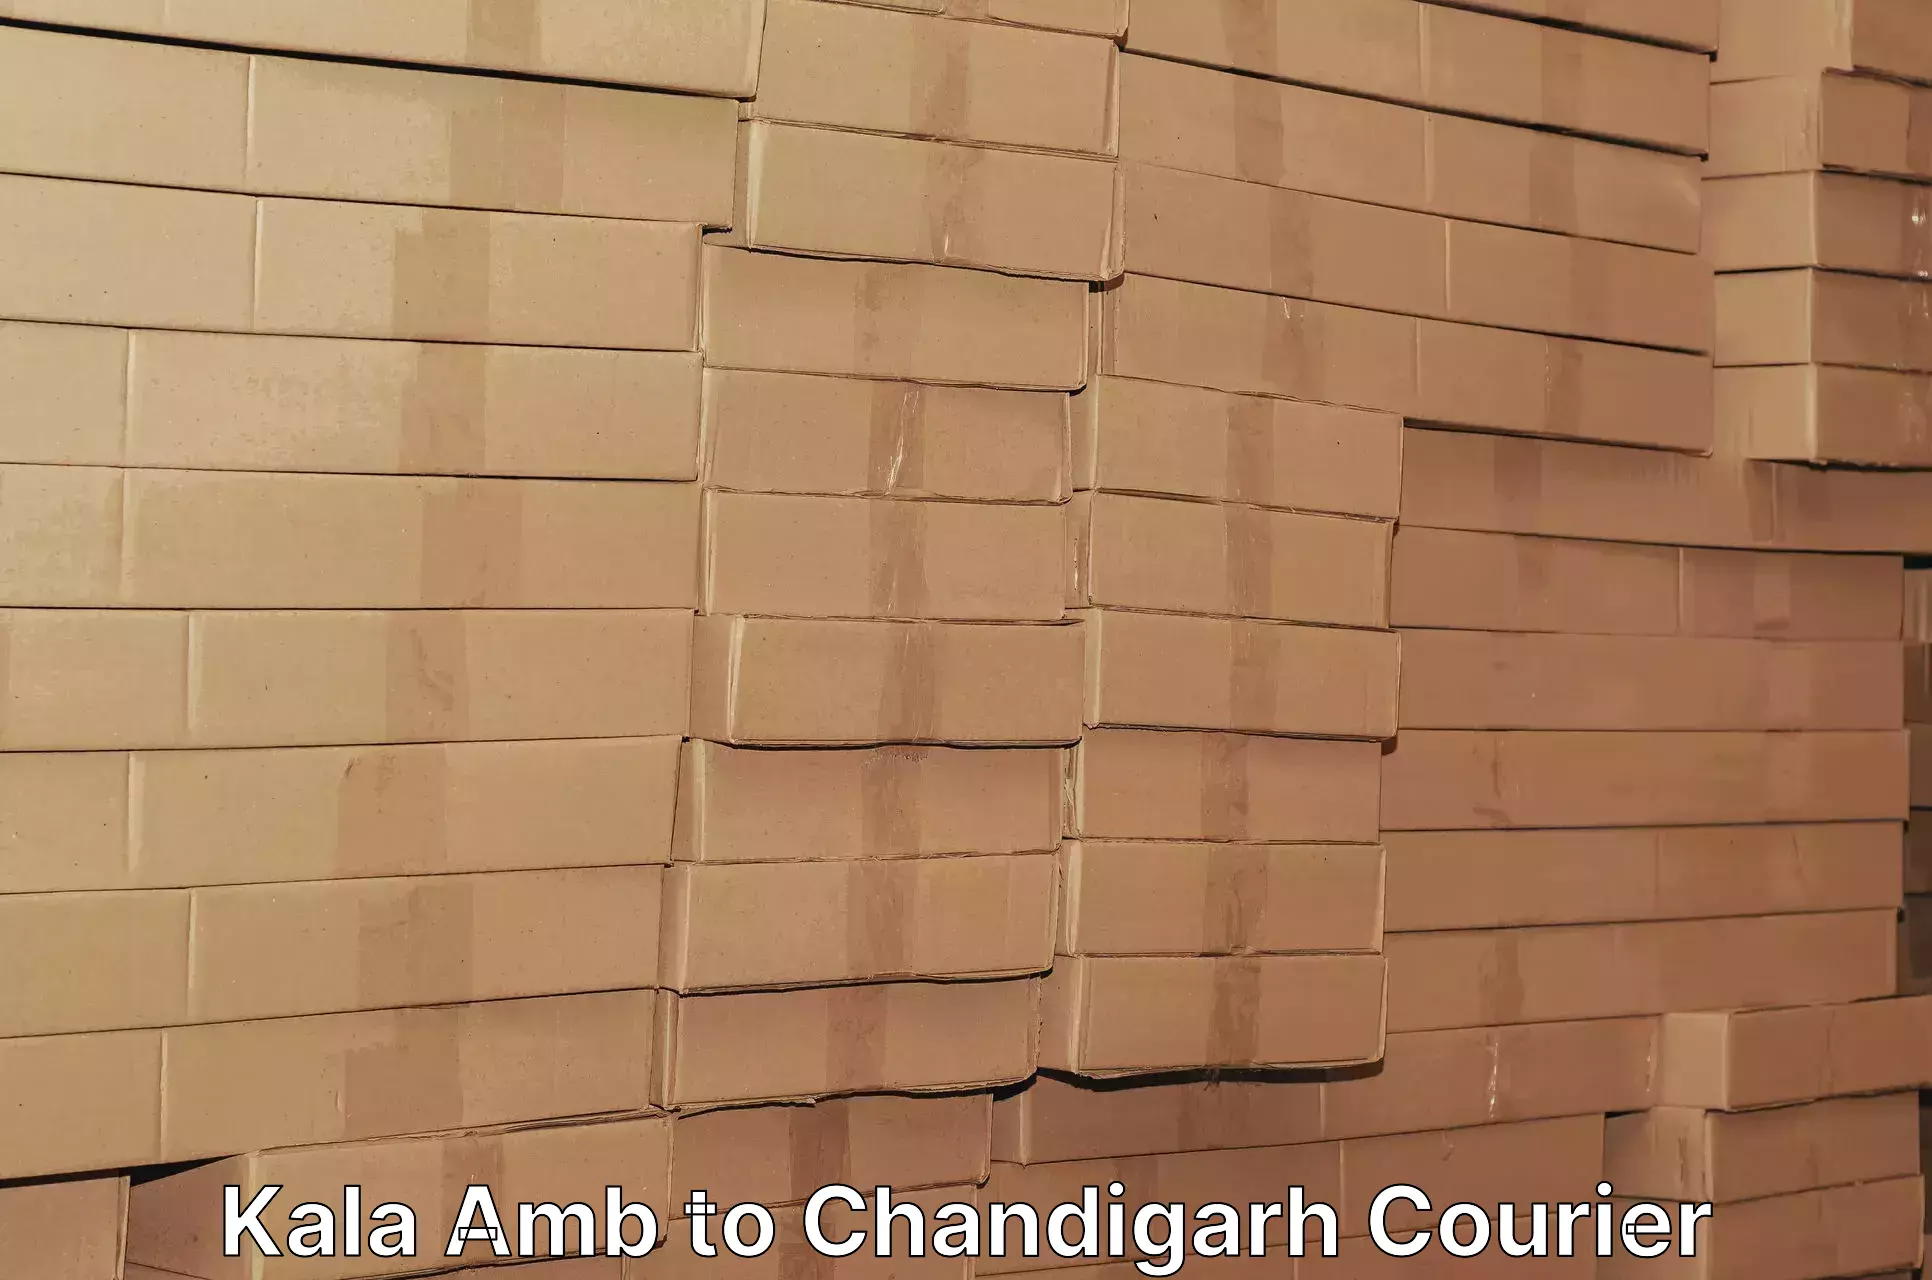 Weekend courier service Kala Amb to Chandigarh